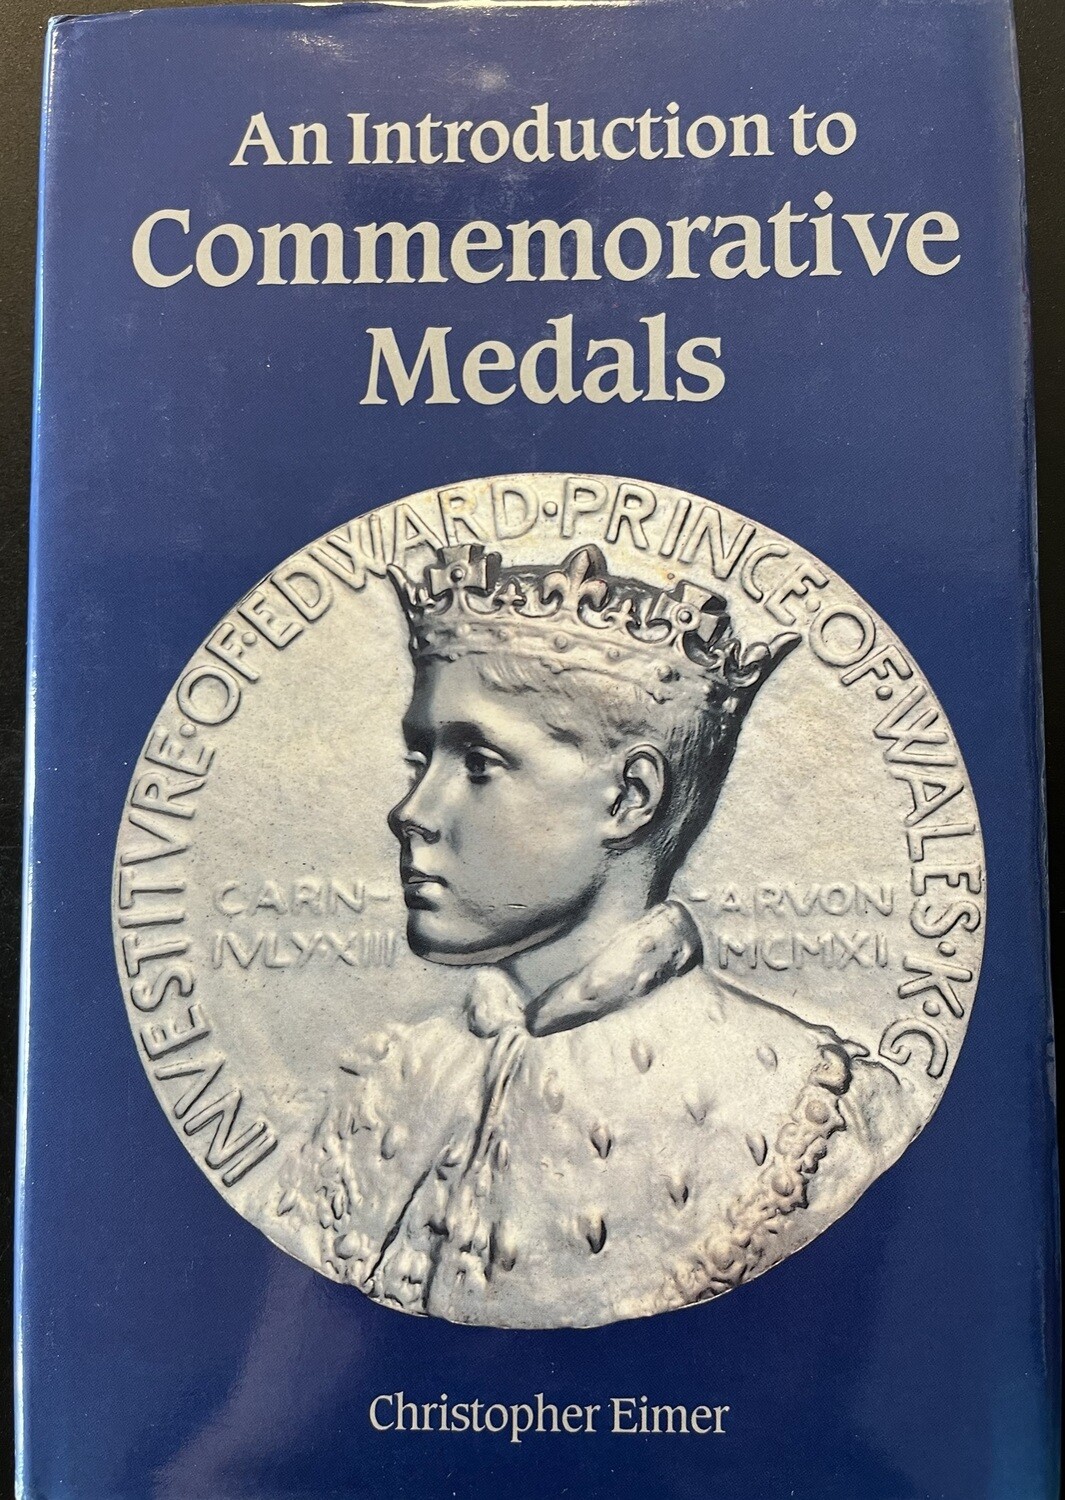 Eimer, Christopher​. An Introduction to Commemorative Medals